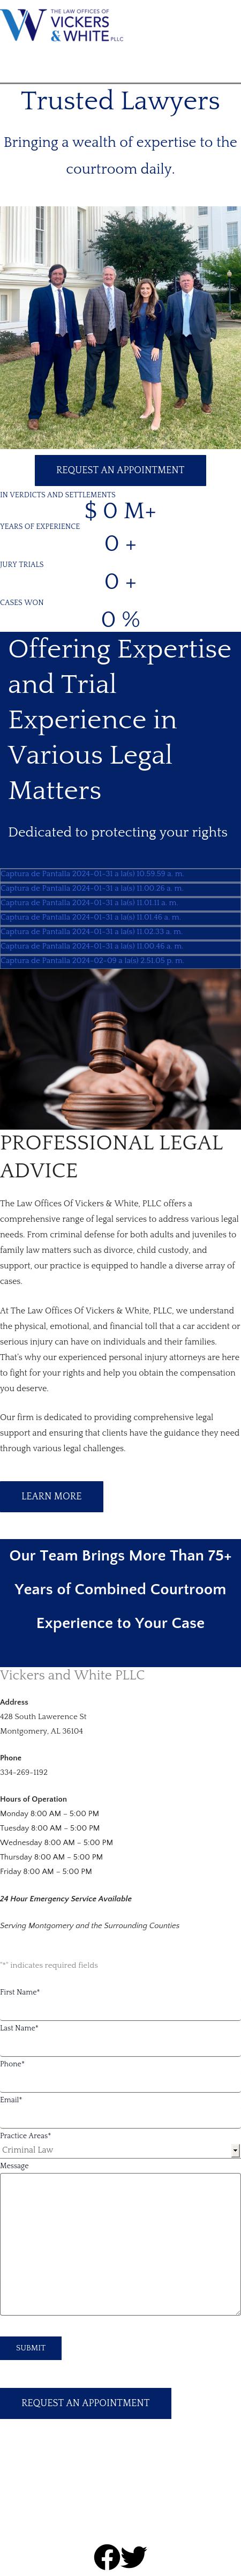 Law Offices of Vickers & White, PLLC - Montgomery AL Lawyers